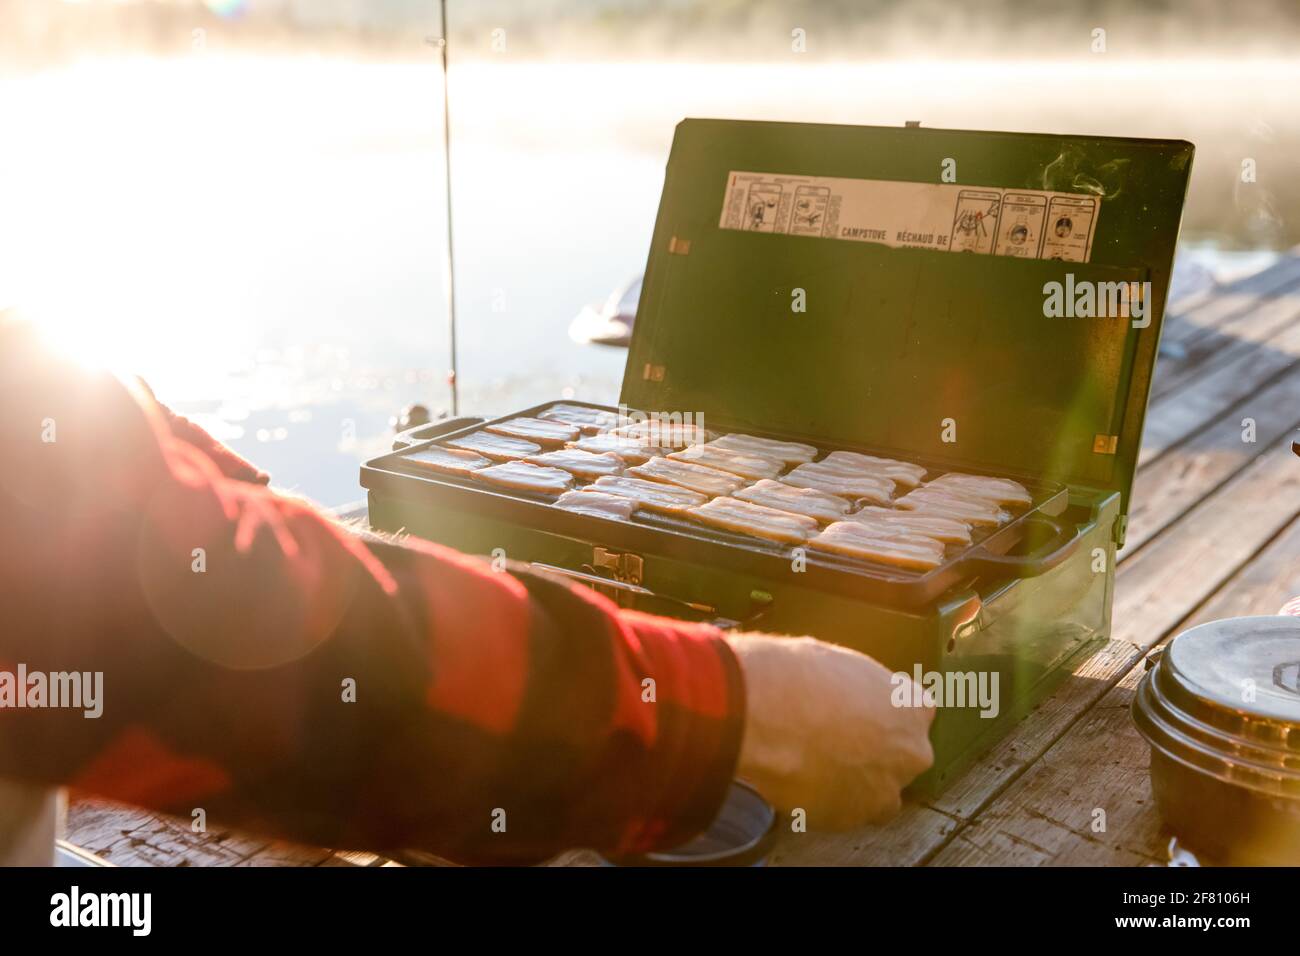 Man's hand adjusting the fire on a portable stove on a sunrise Stock Photo